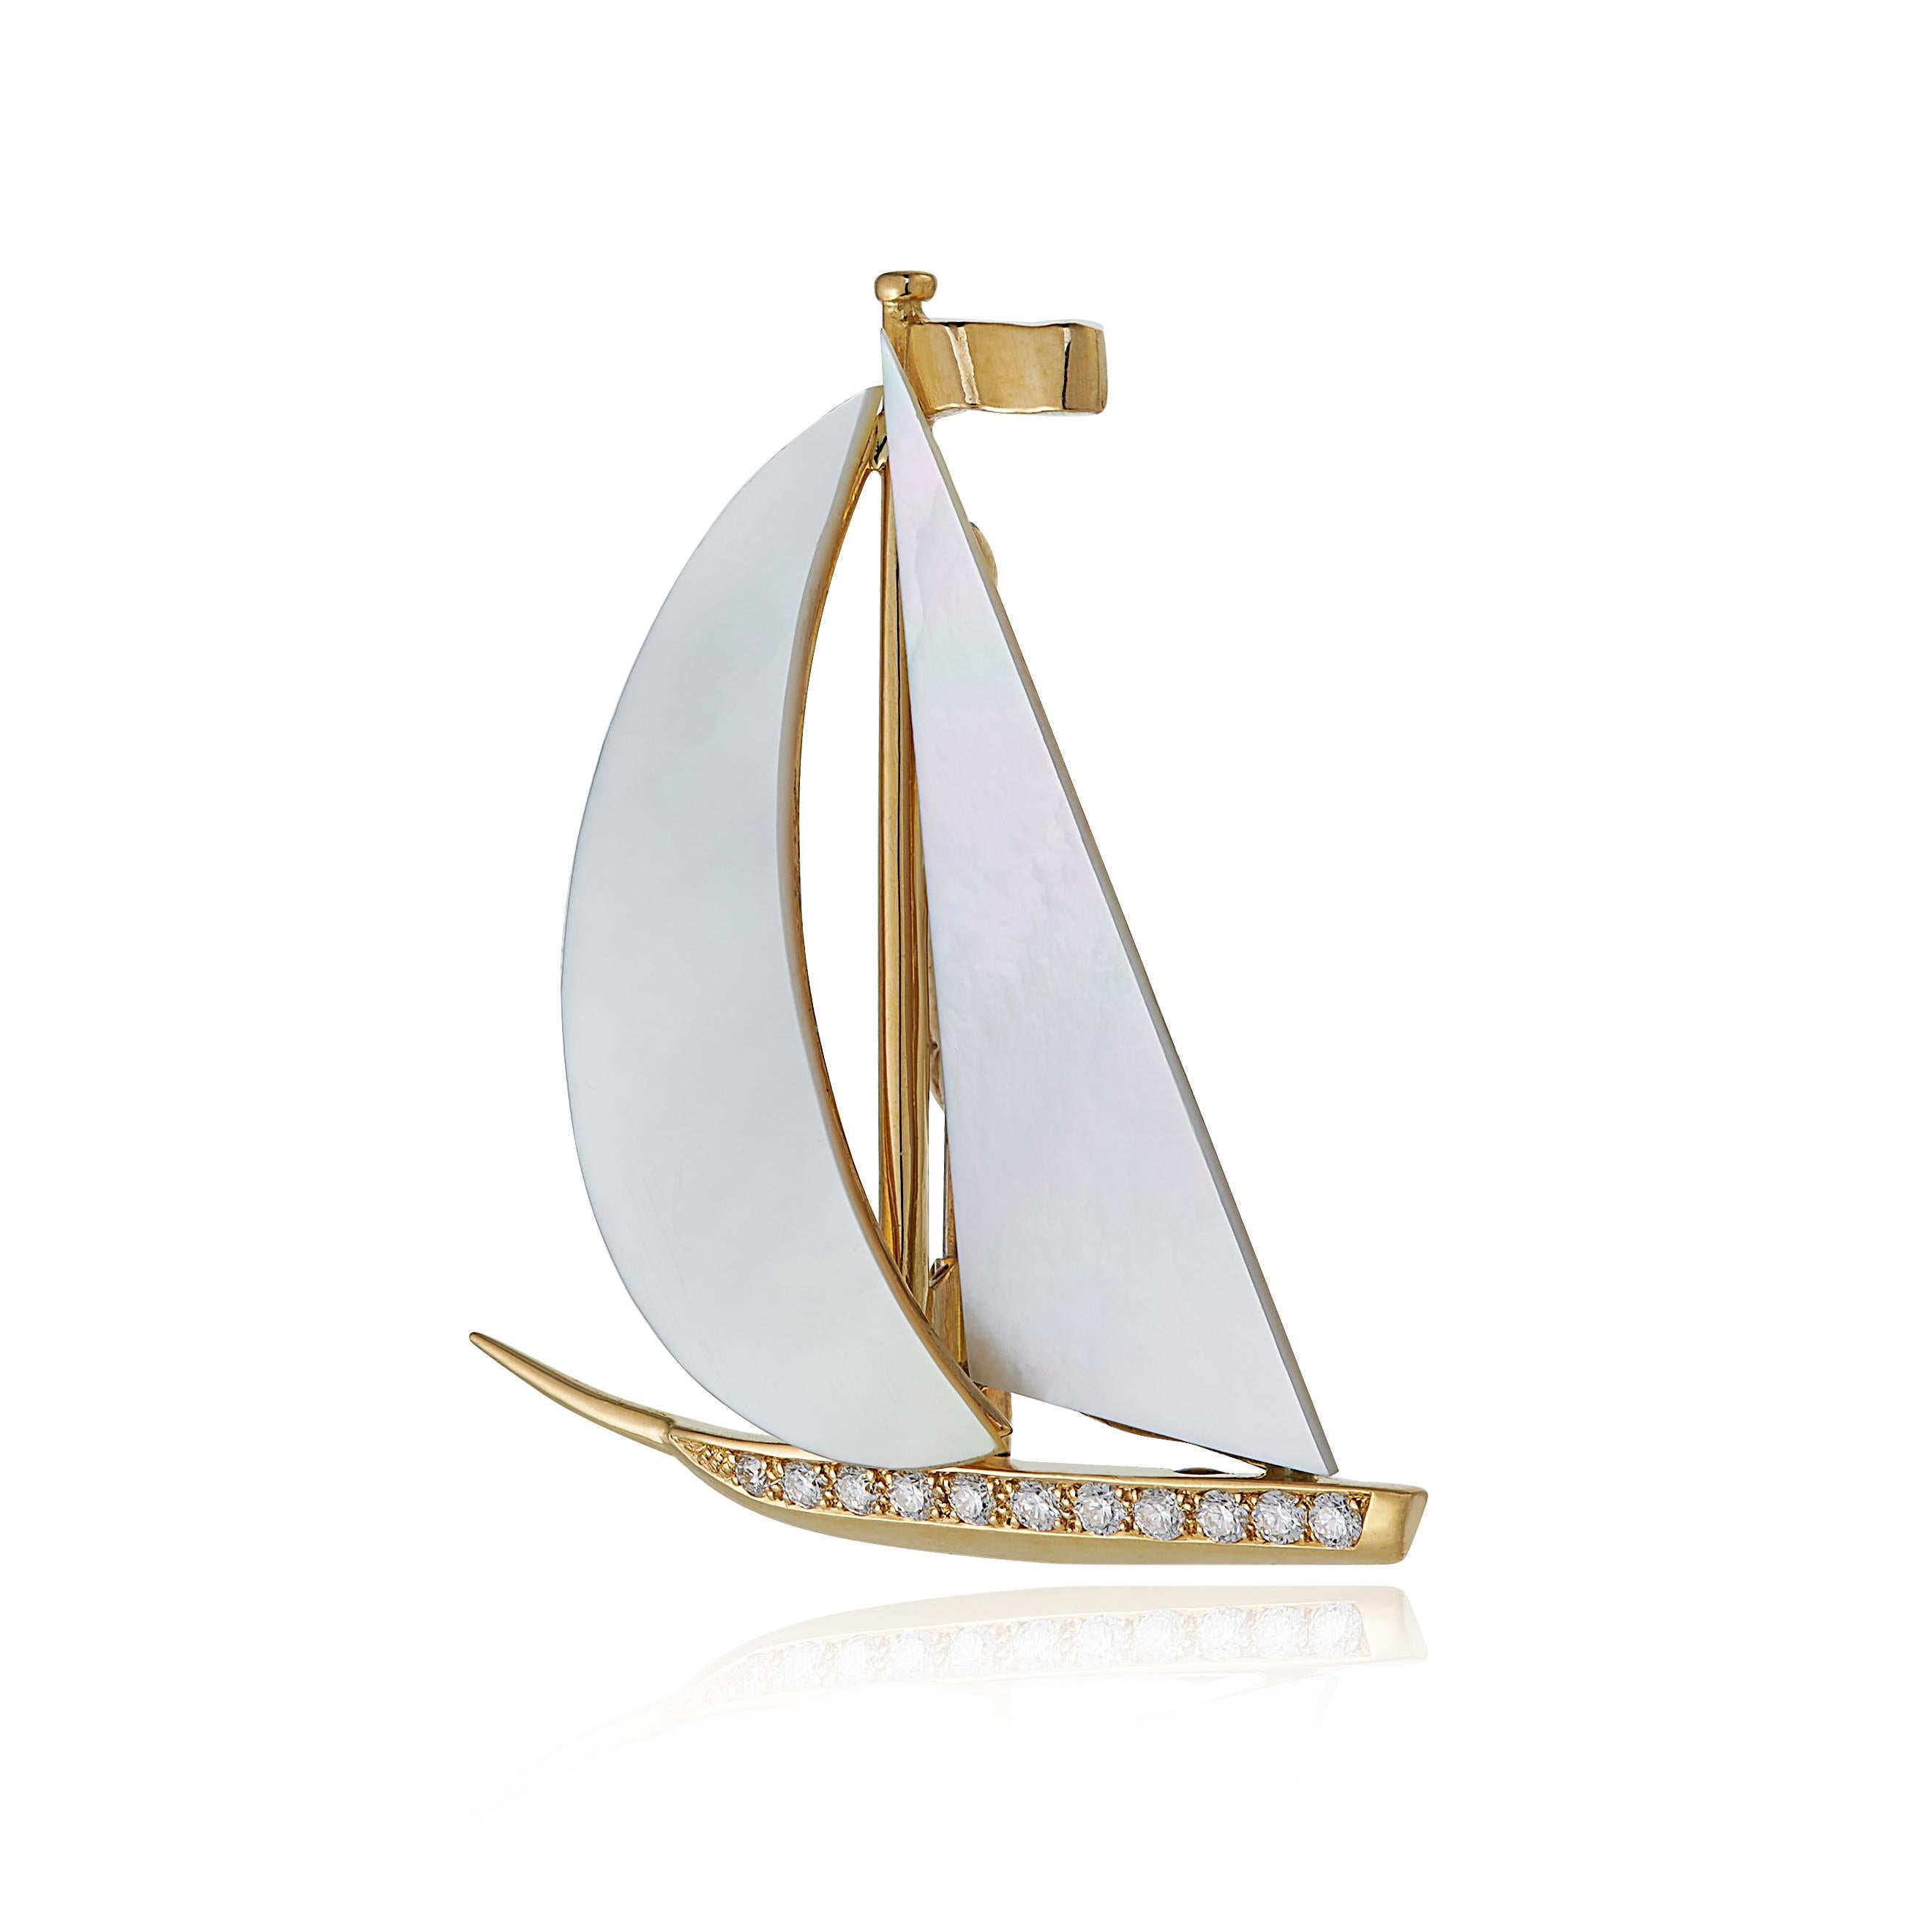 E Wolfe & Company 18 carat Yellow Gold and Mother of Pearl Sailing Boat Brooch. The boat's sails consist of mother of pearl sections and there are .15 carats diamonds of G colour and VS clarity diamonds set to the lower section. The brooch was